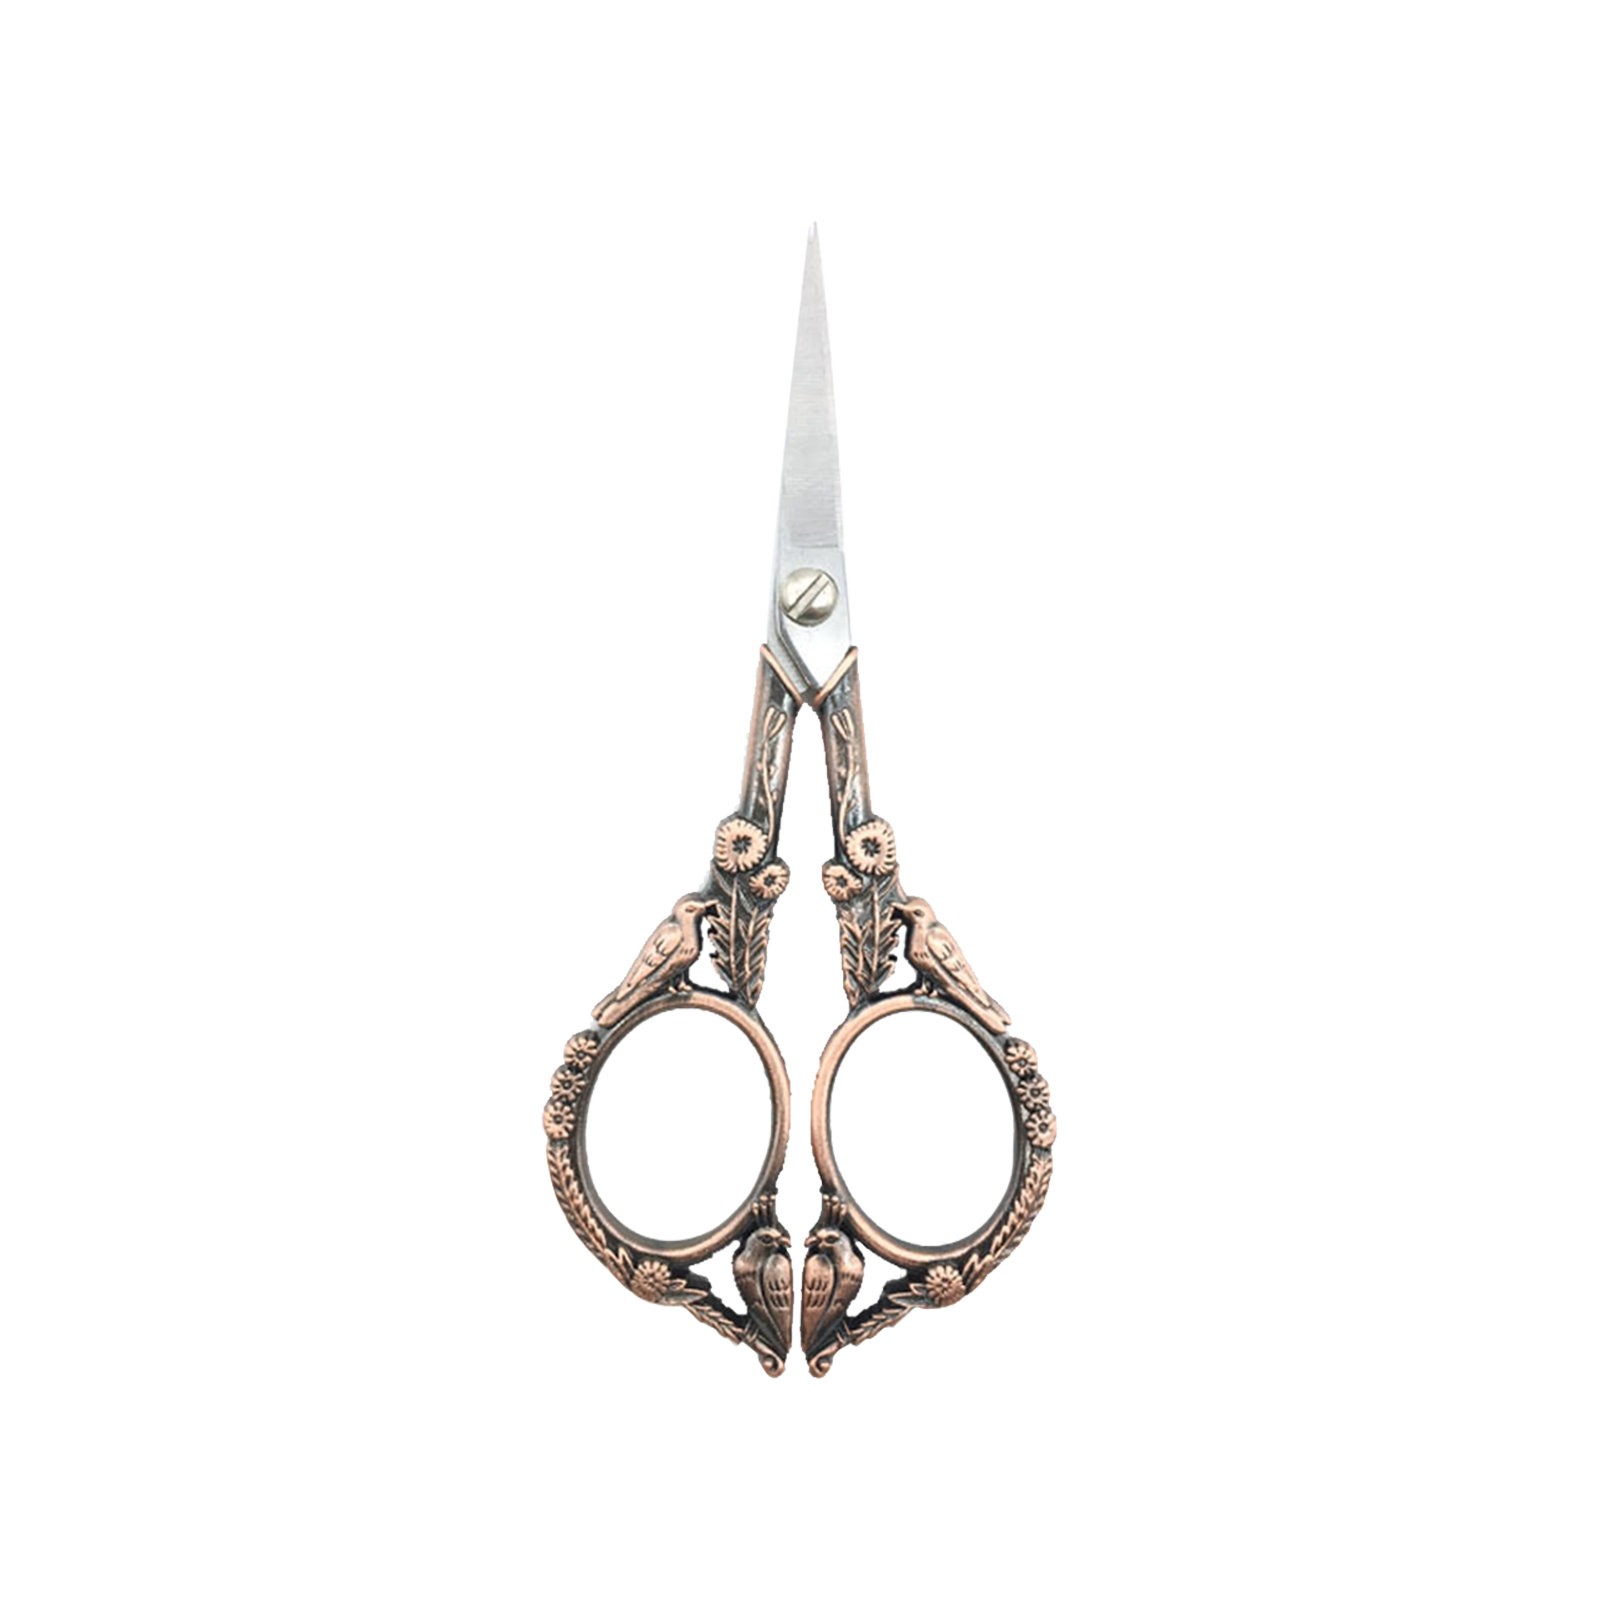 mnjin embroidery scissors sewing embroidery scissors small vintage